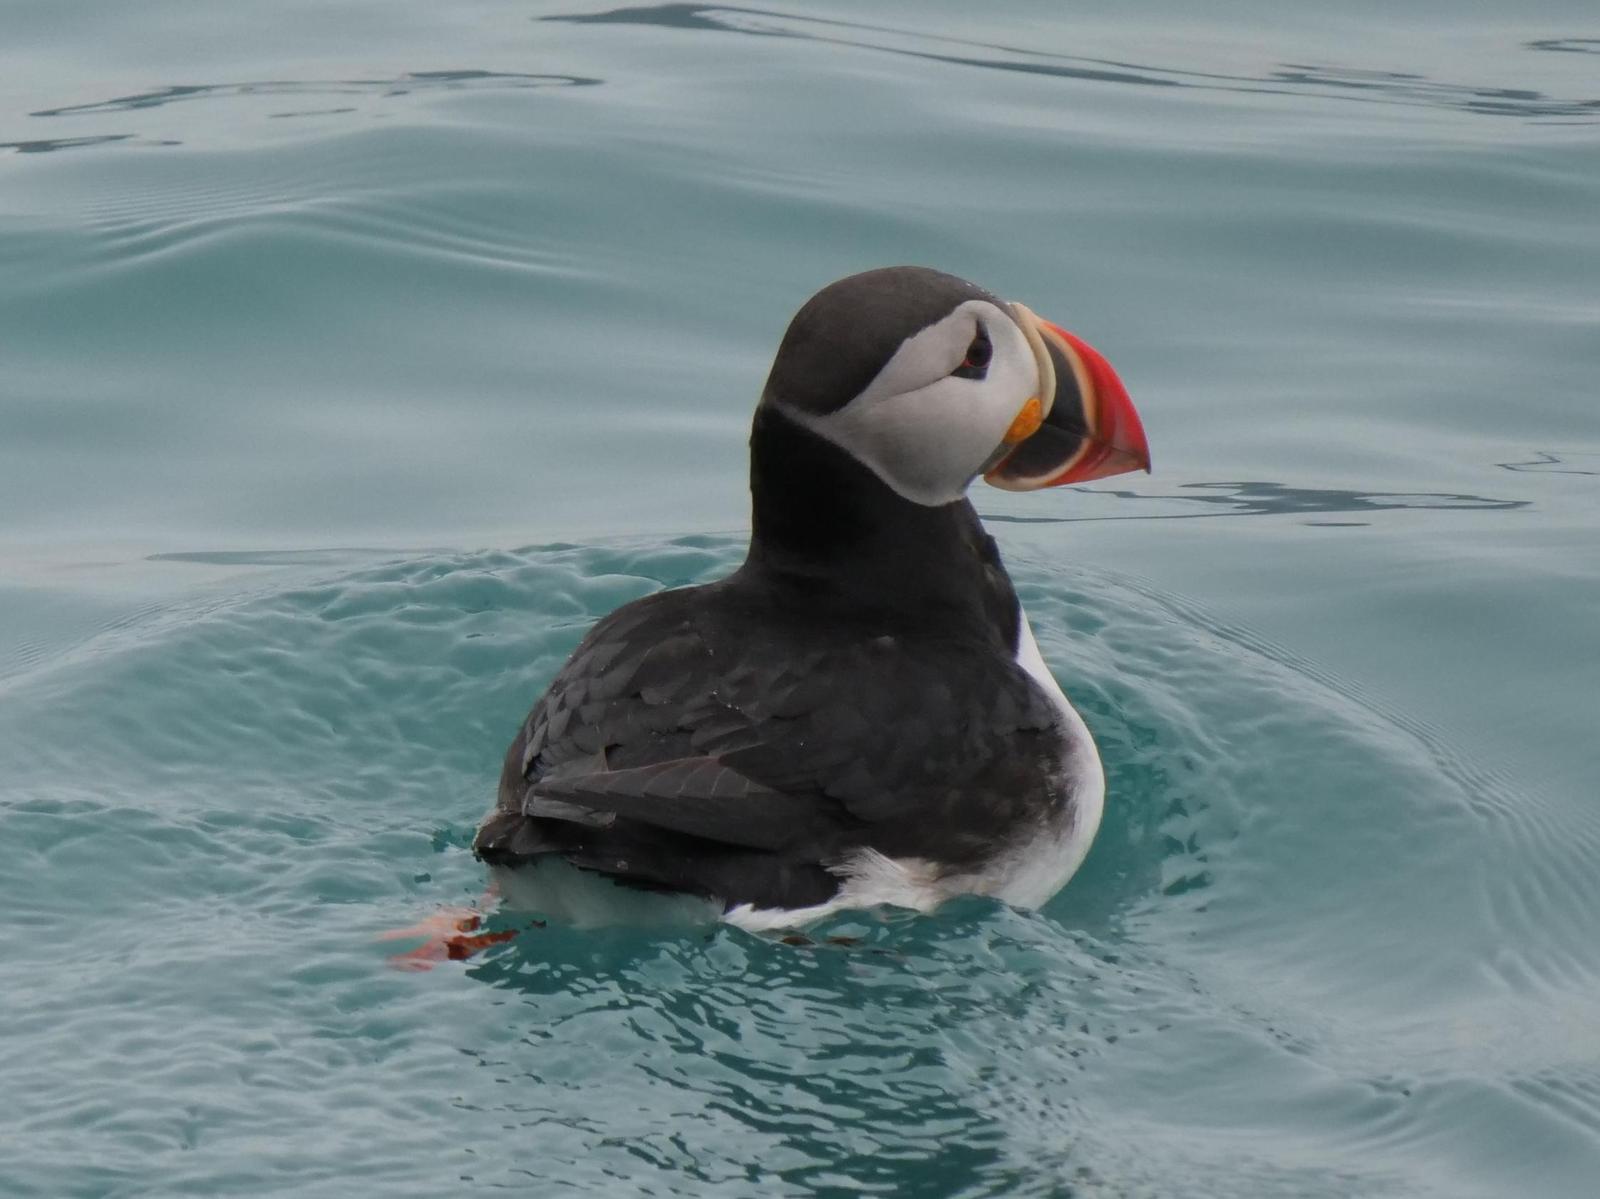 Atlantic Puffin Photo by Peter Lowe